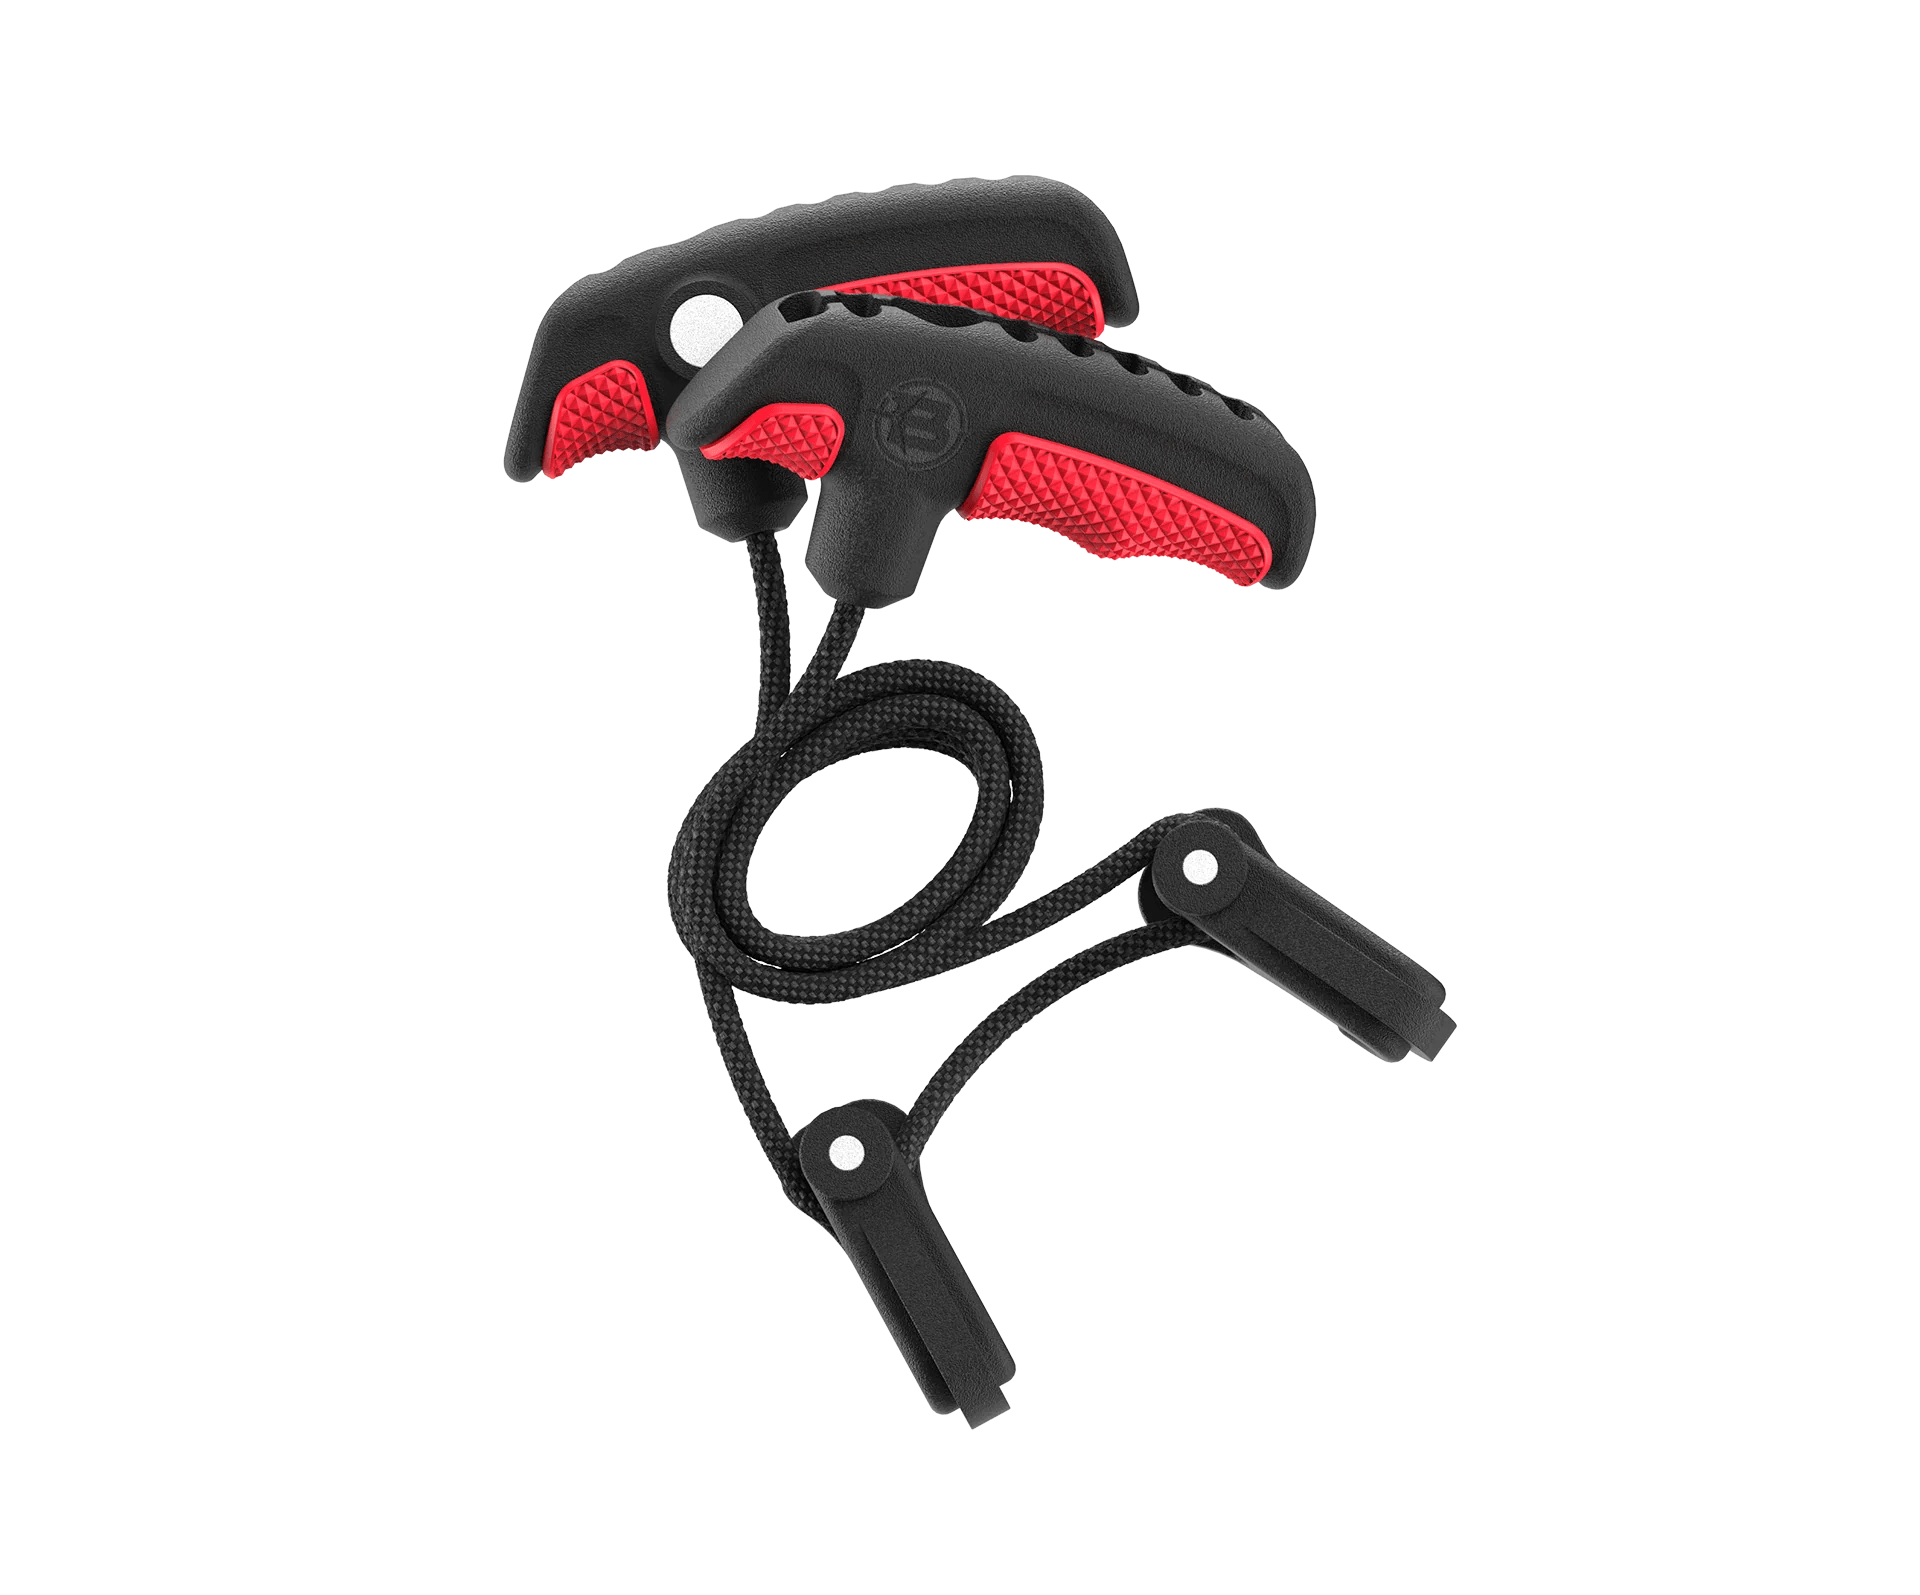 Barnett Premium Hook Rope Cocking Device - Leapfrog Outdoor Sports and Apparel